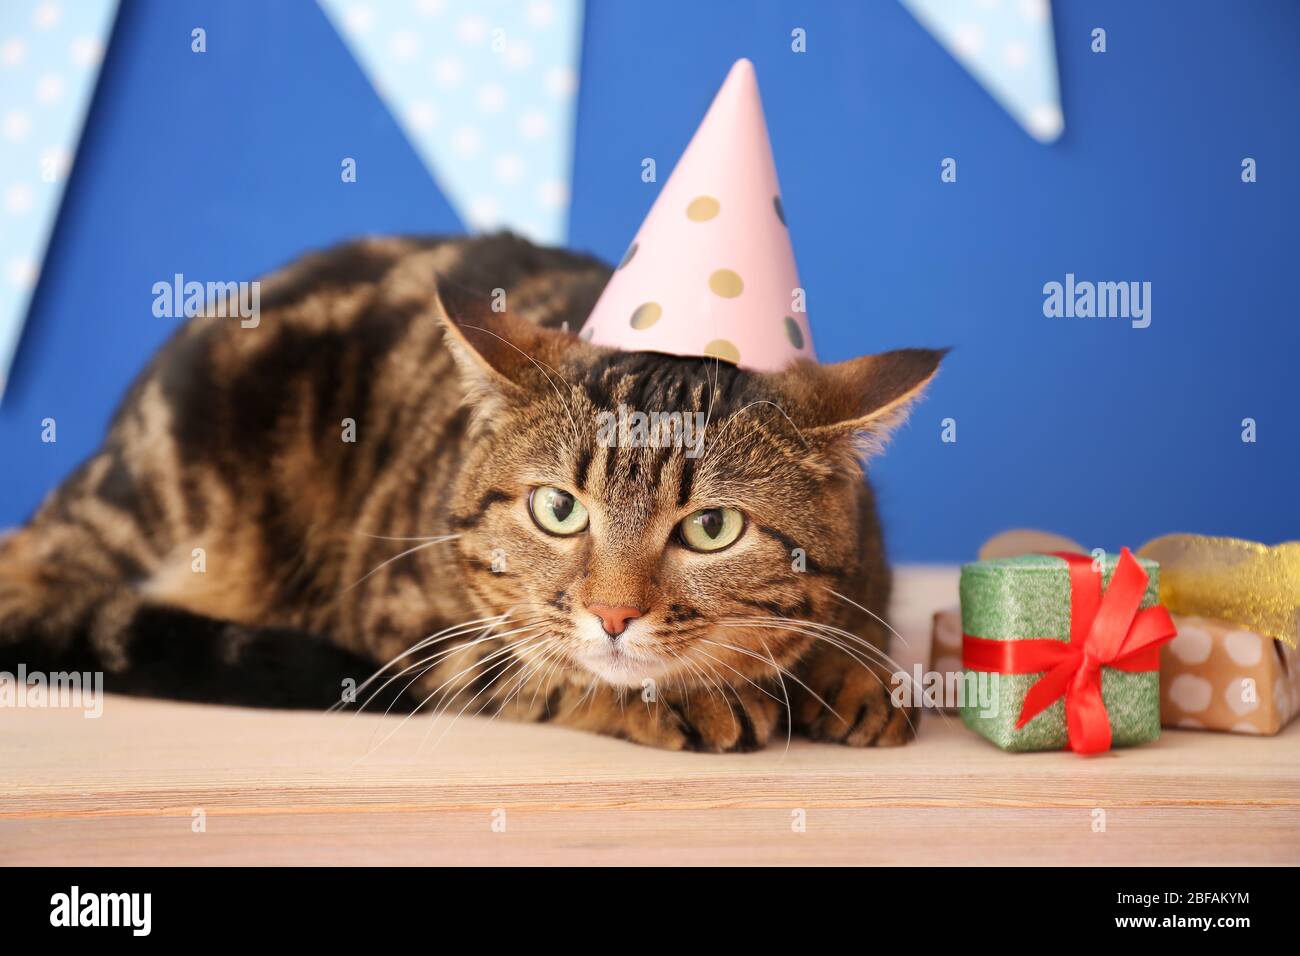 Cute cat in party hat and with Birthday gifts near color wall Stock Photo